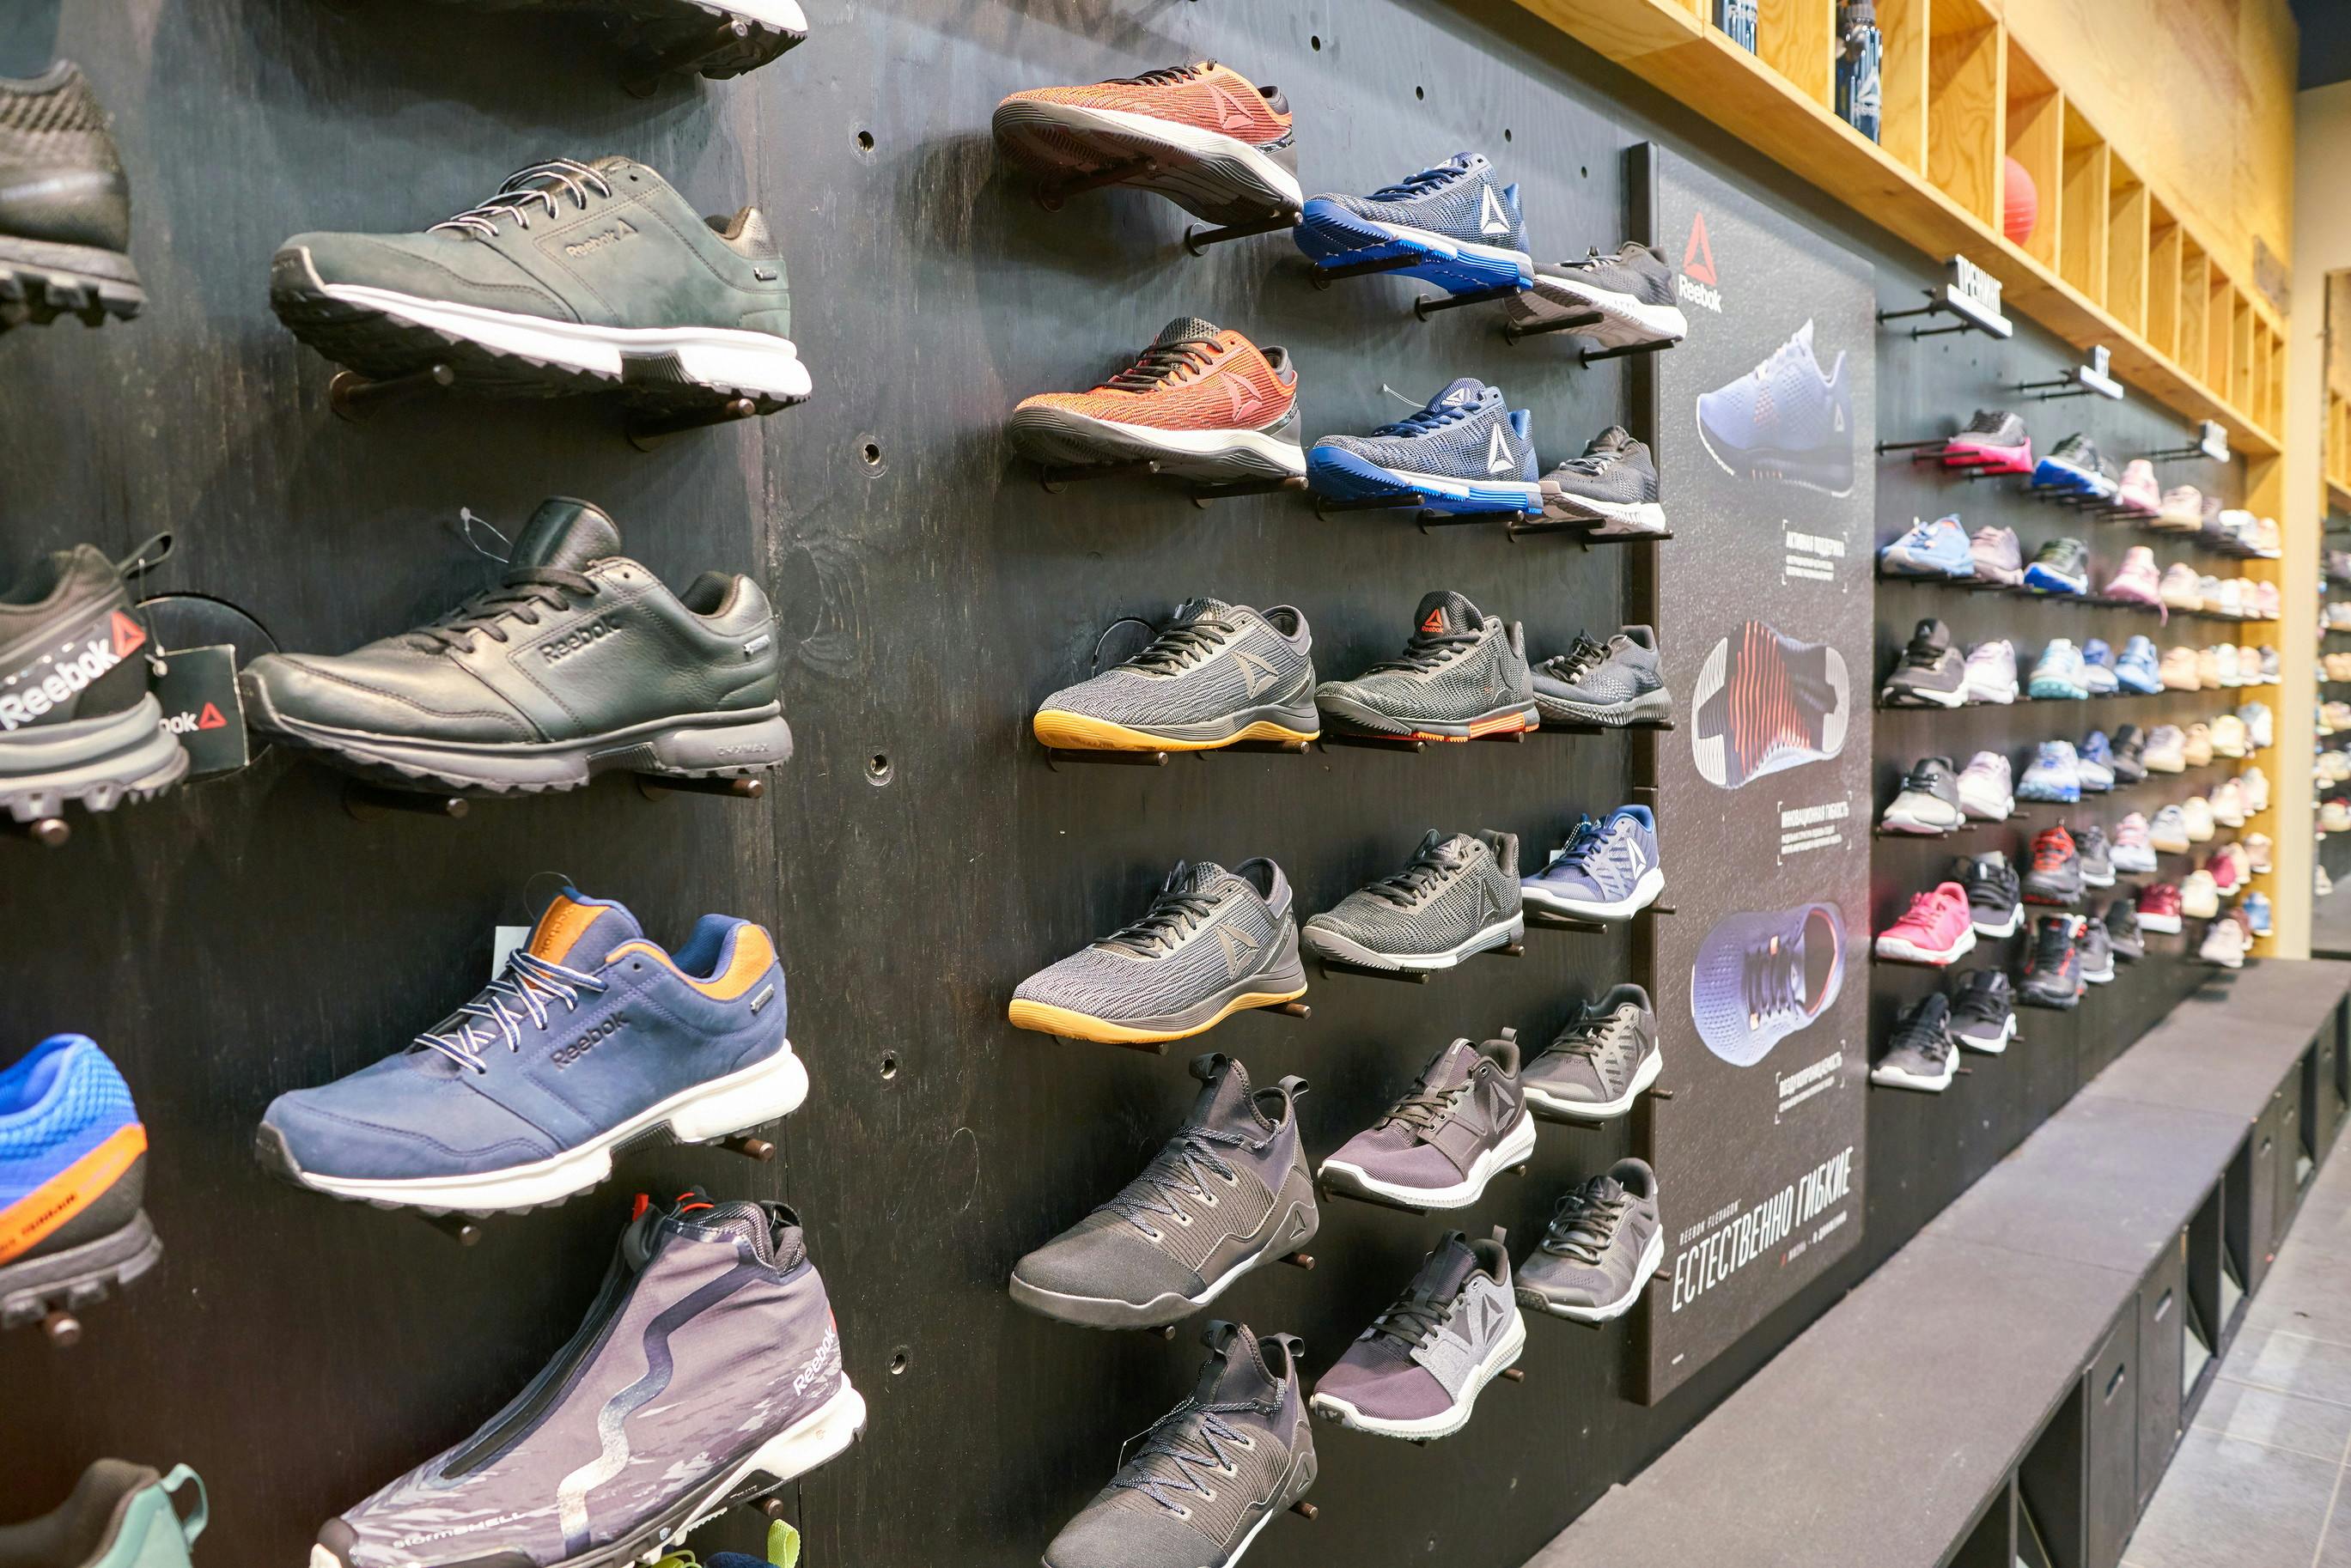 Extra 50% Off Sale: Reebok Shoes, as 